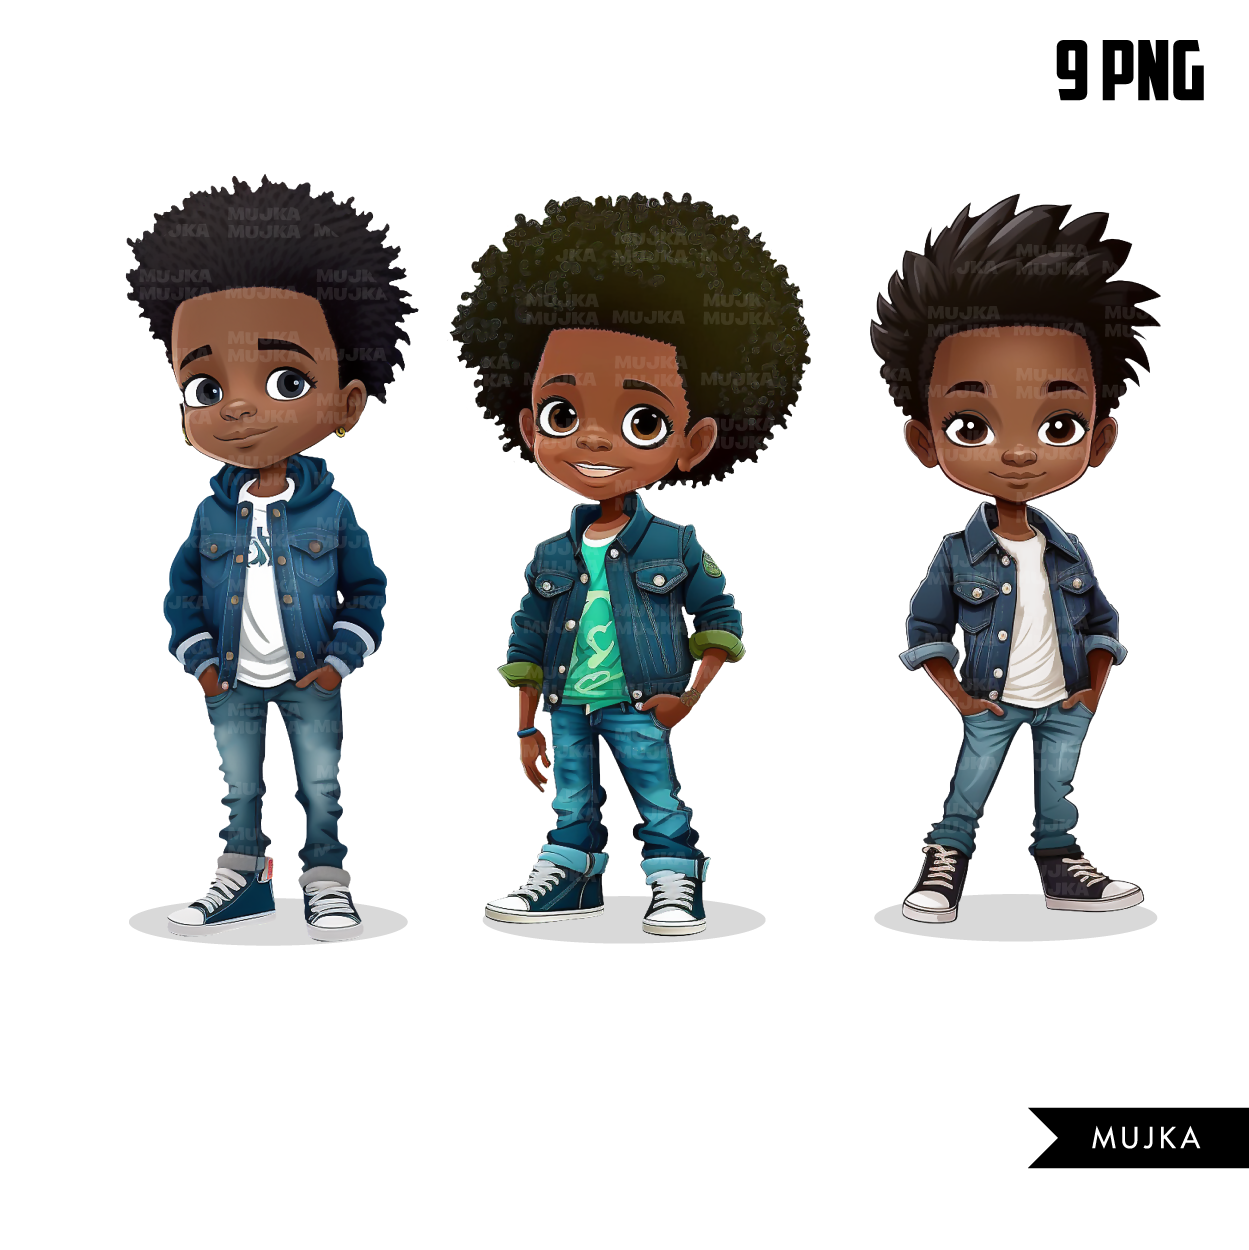 Black boys art, siblings png, friends png, dreadlocks png, black boys clipart, cool black boys, twins png, brothers clipart, afro png